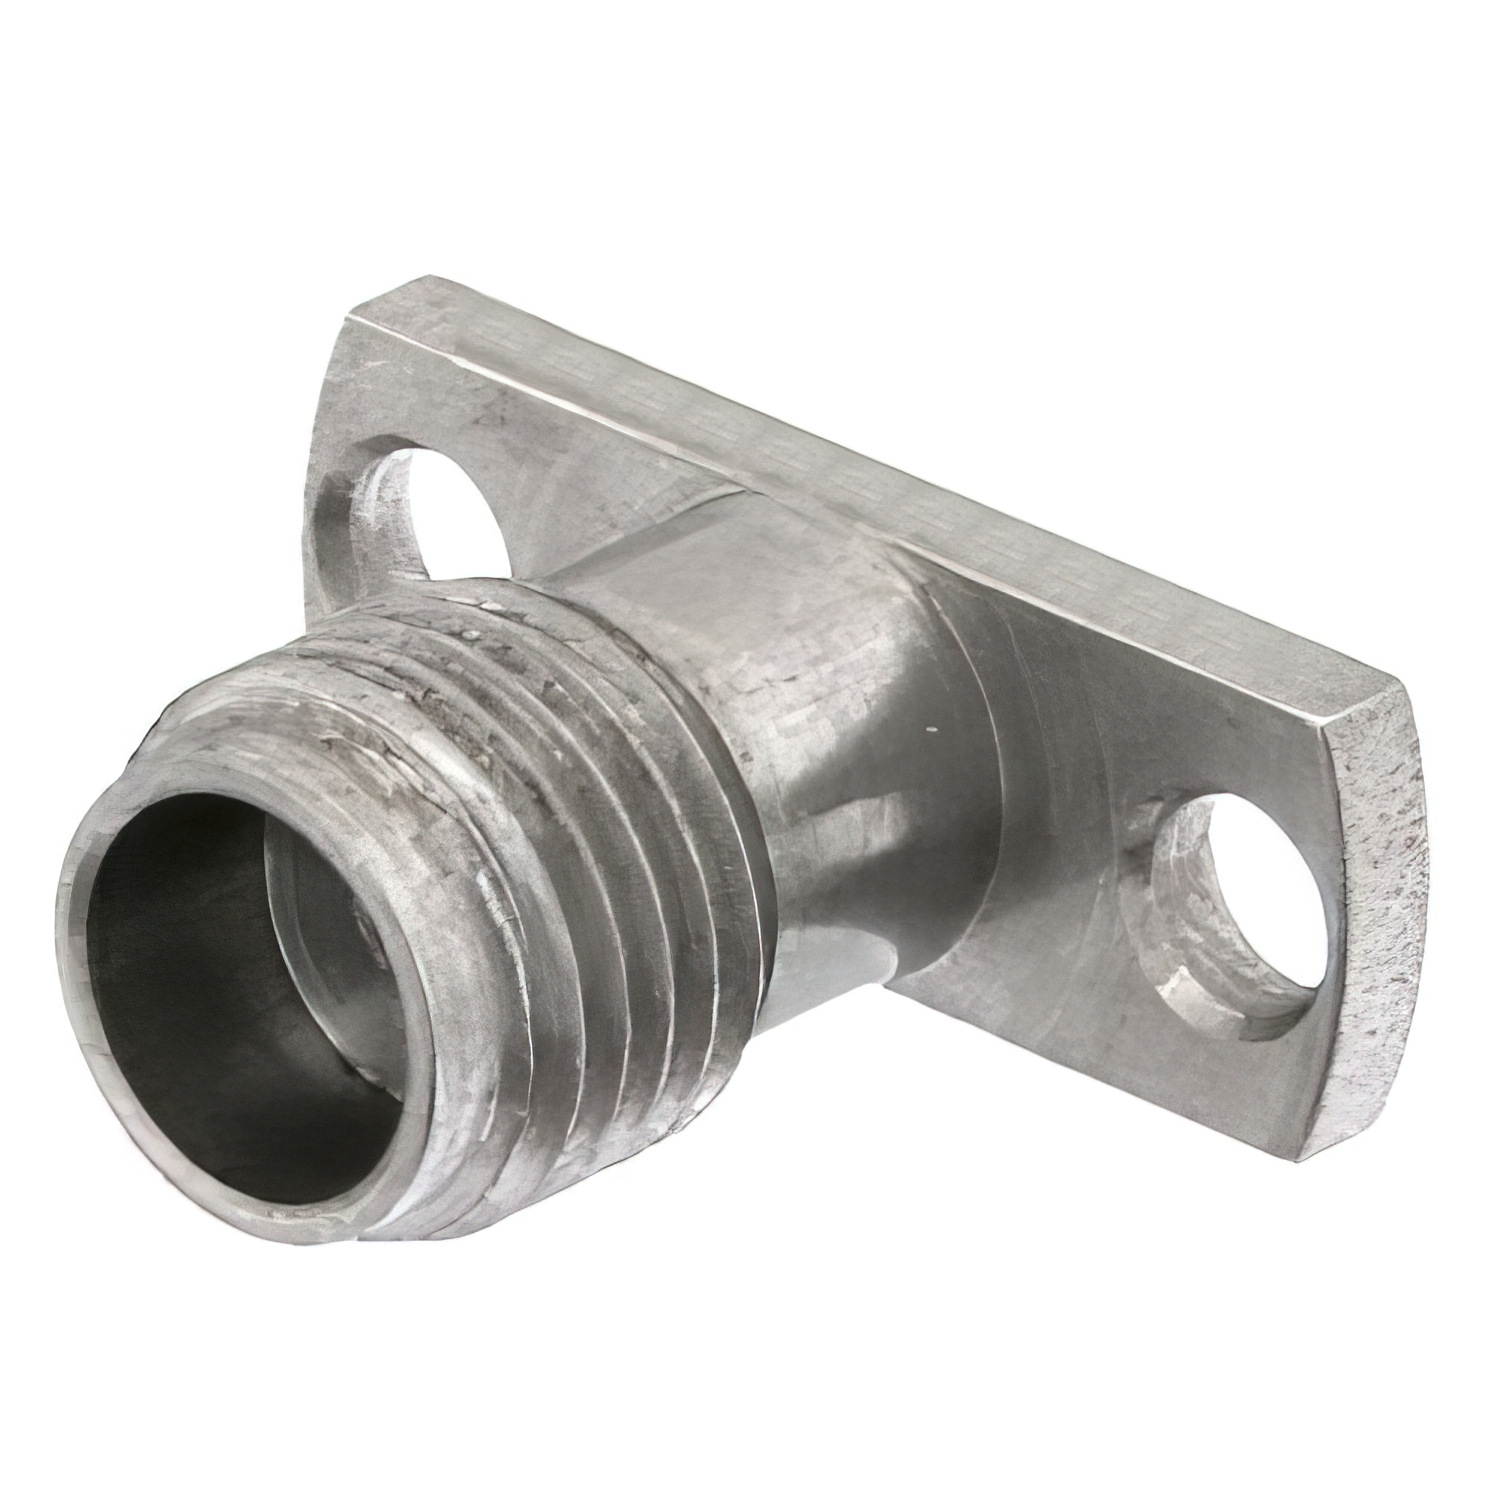 1.85mm Female Field Replaceable Connector 2 Hole Flange Mount1